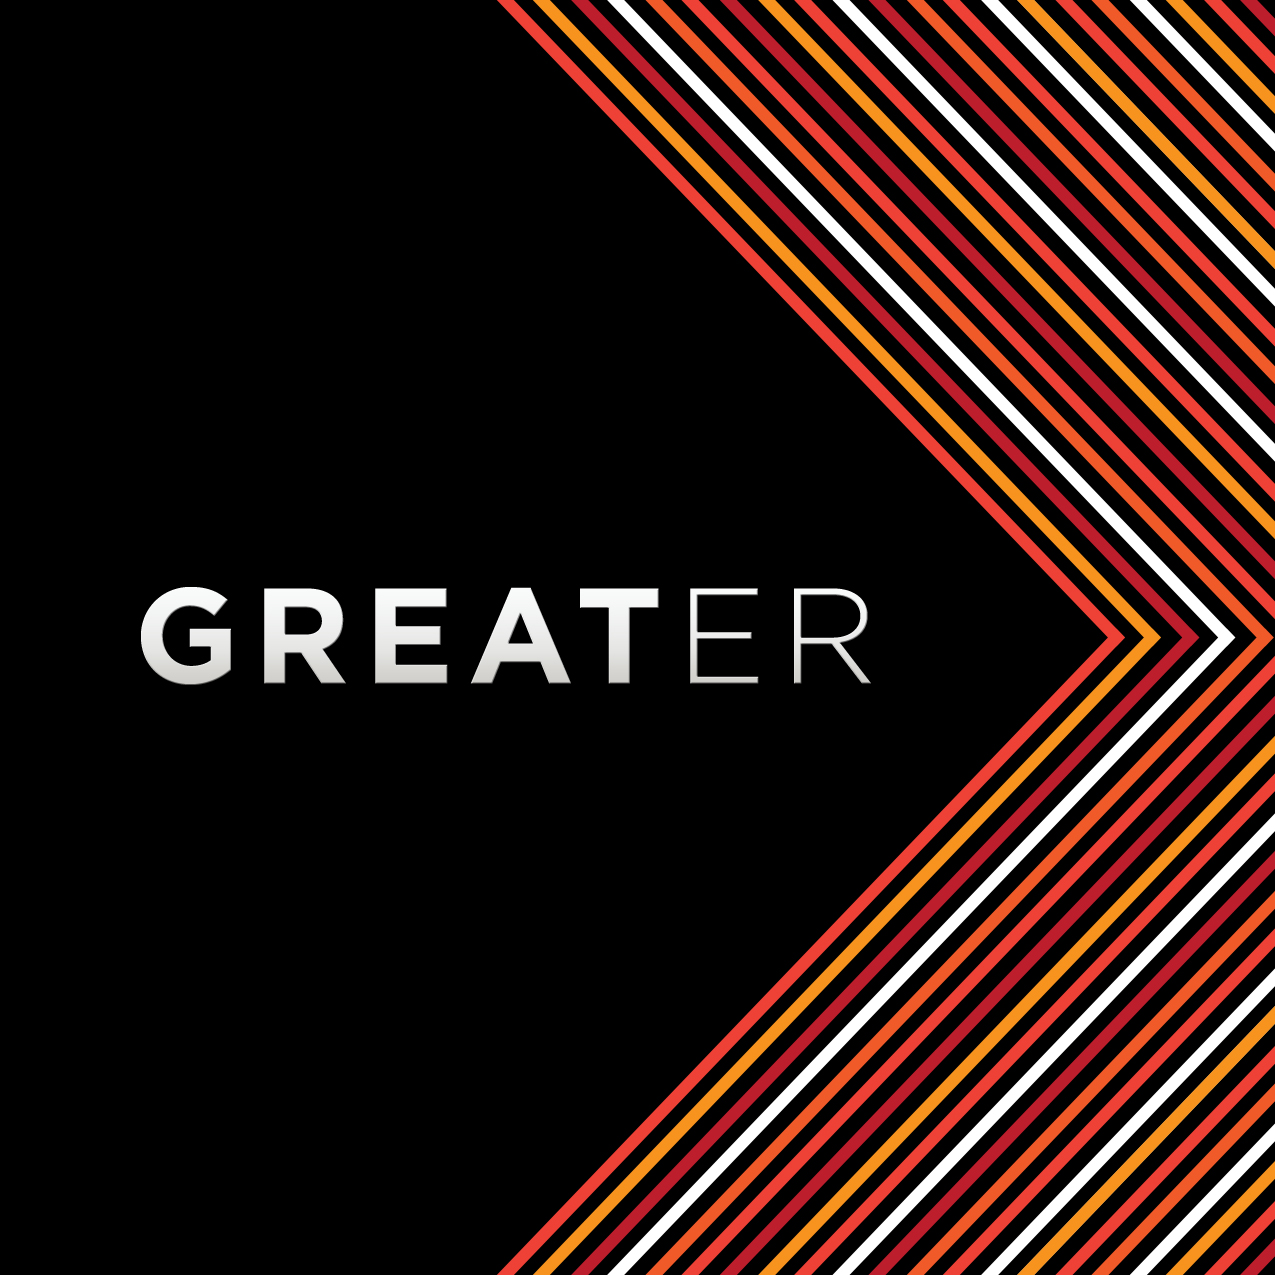 GREATER: Open Your Eyes